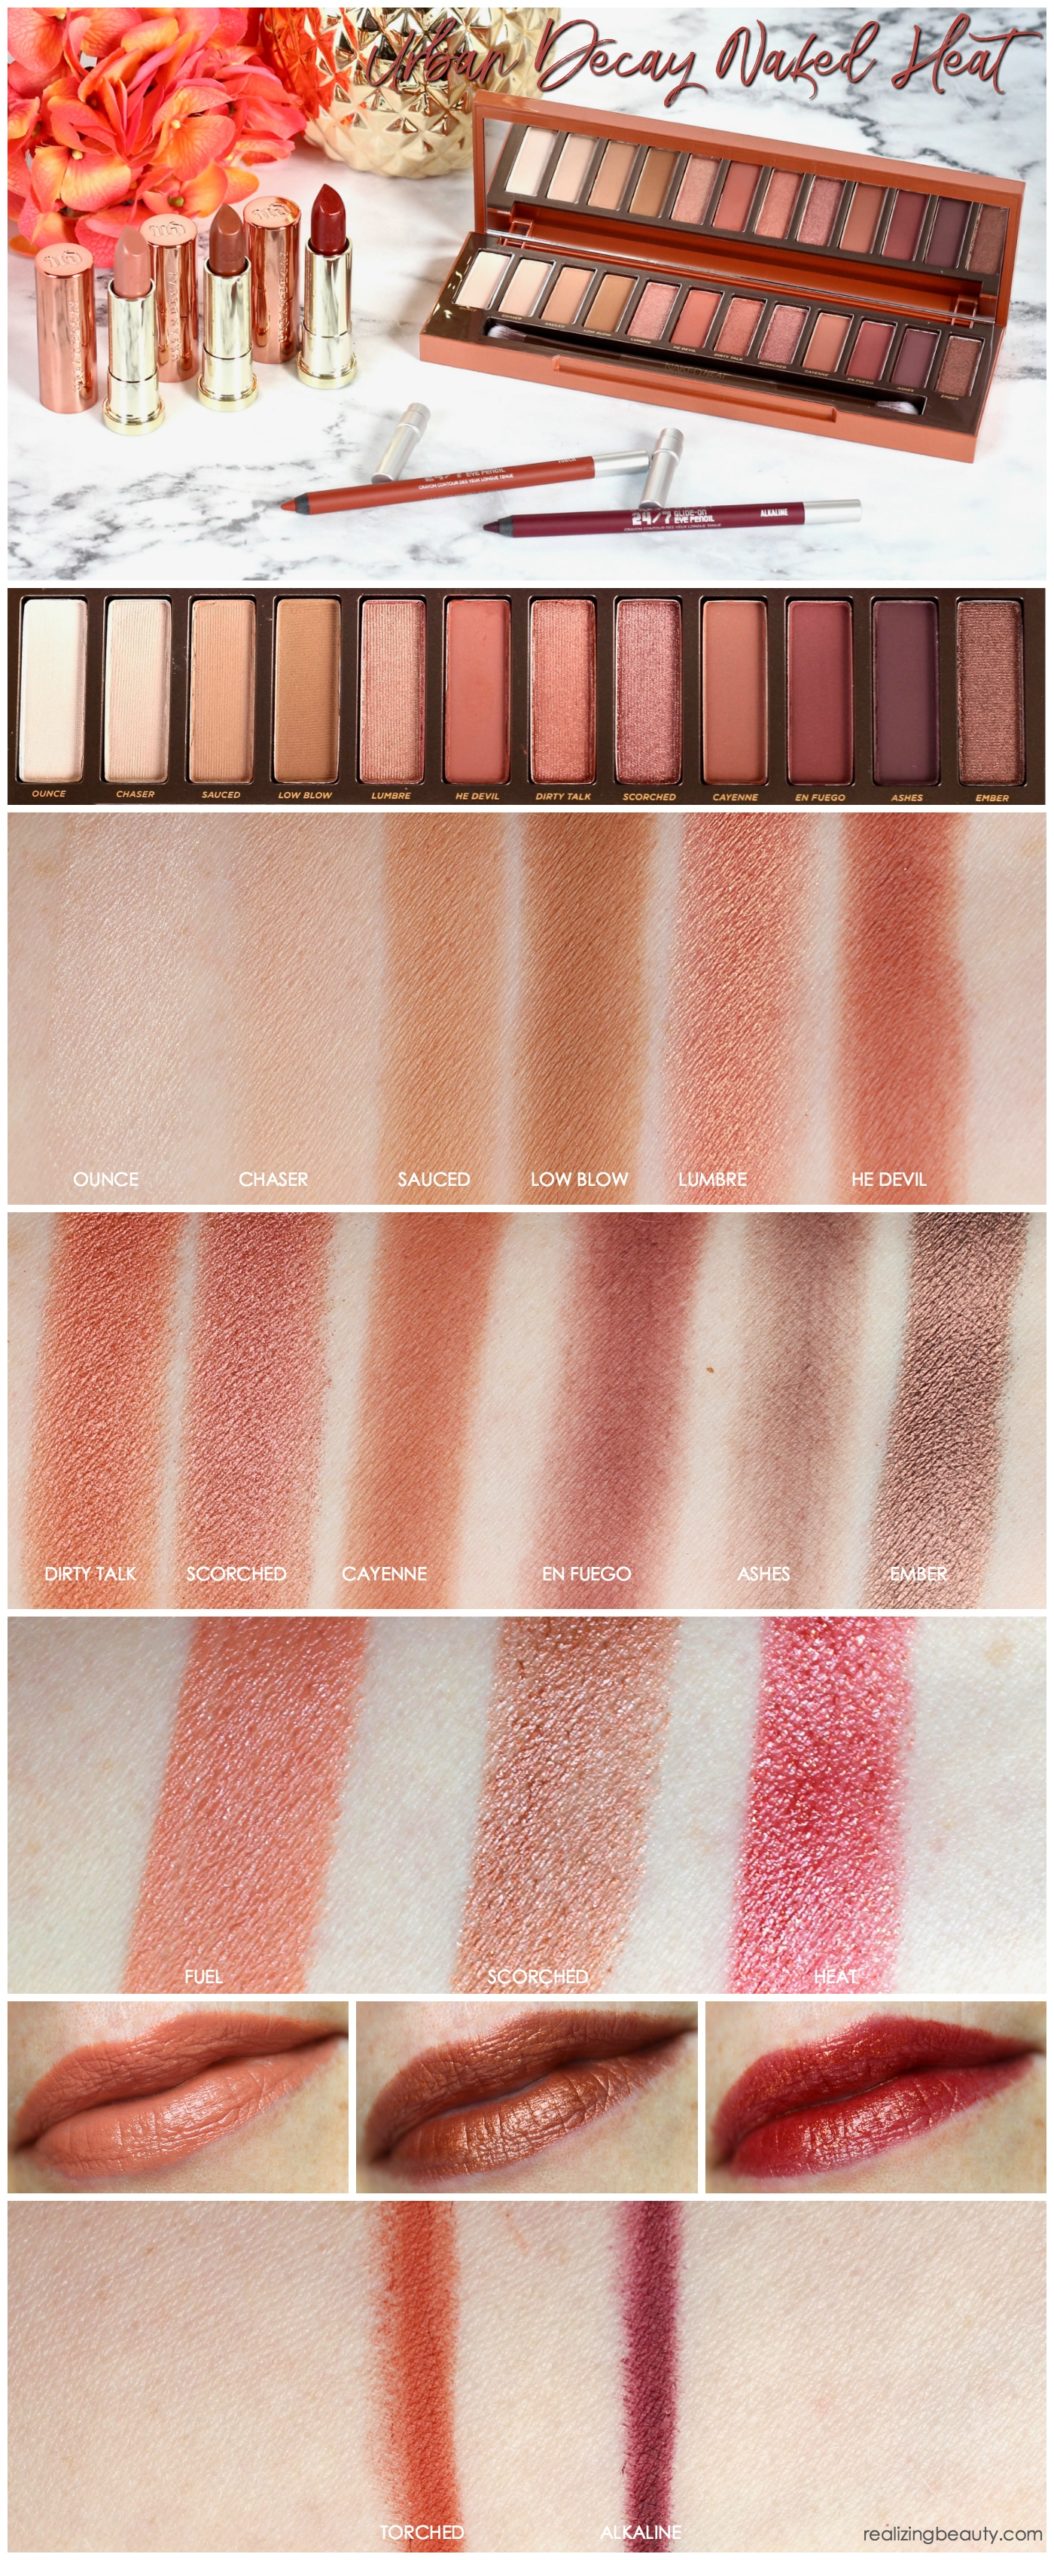 Urban Decay Naked Heat Palette Lipsticks And Liners Review Swatches